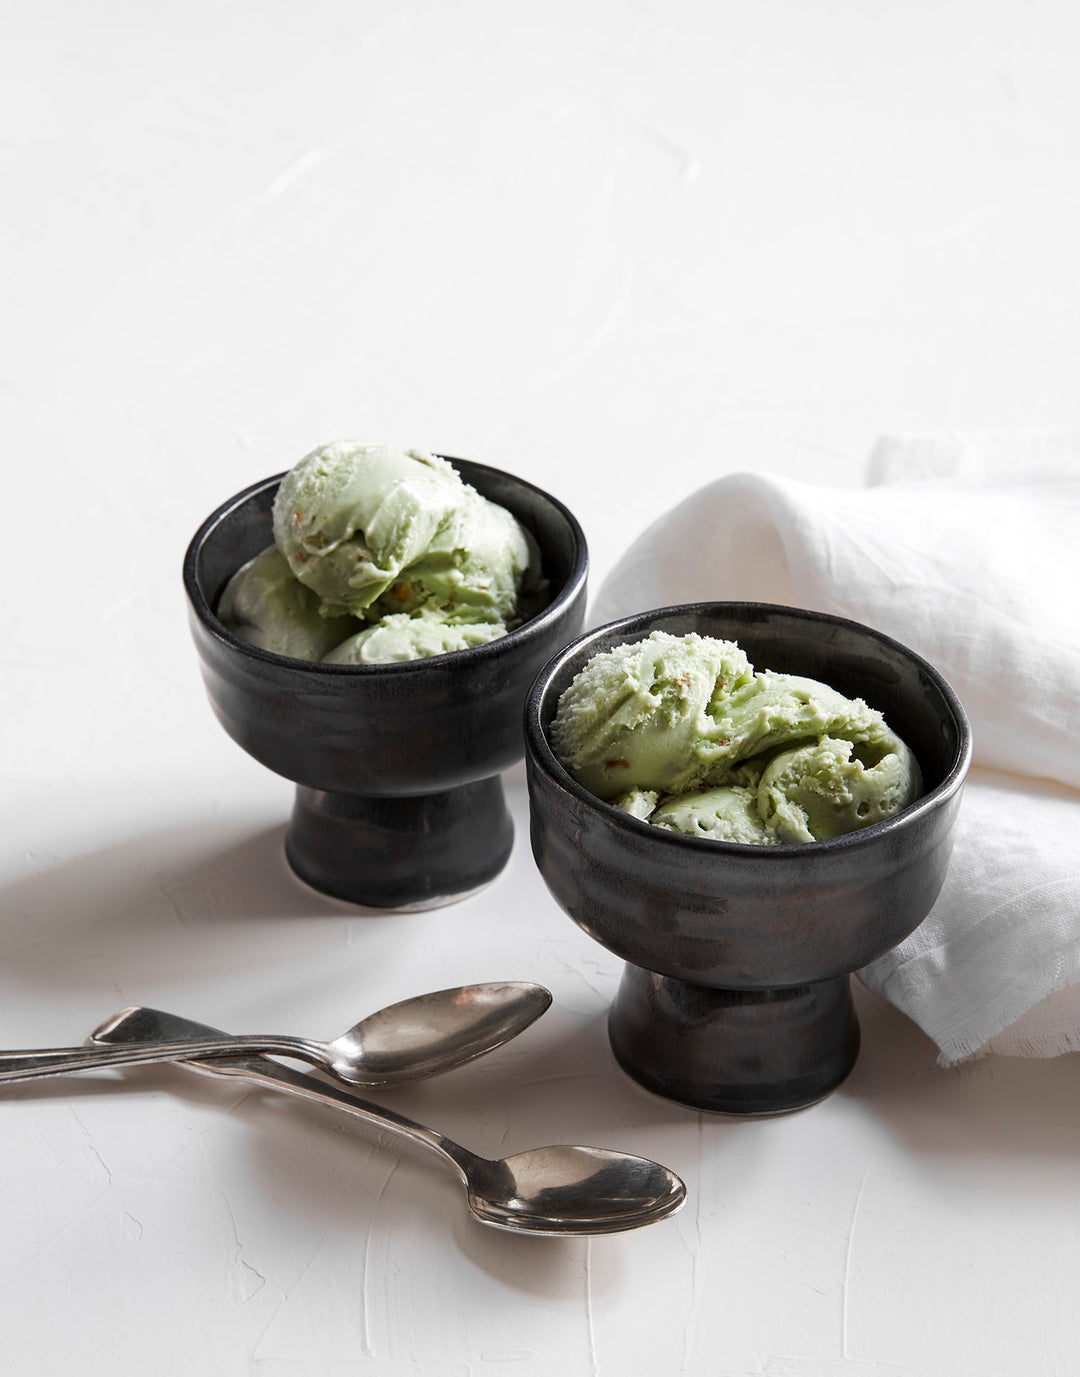 DBO HOME set of artisan ceramic small batch dessert coupe in black glaze with green pistachio ice cream on a white table with white linen napkins